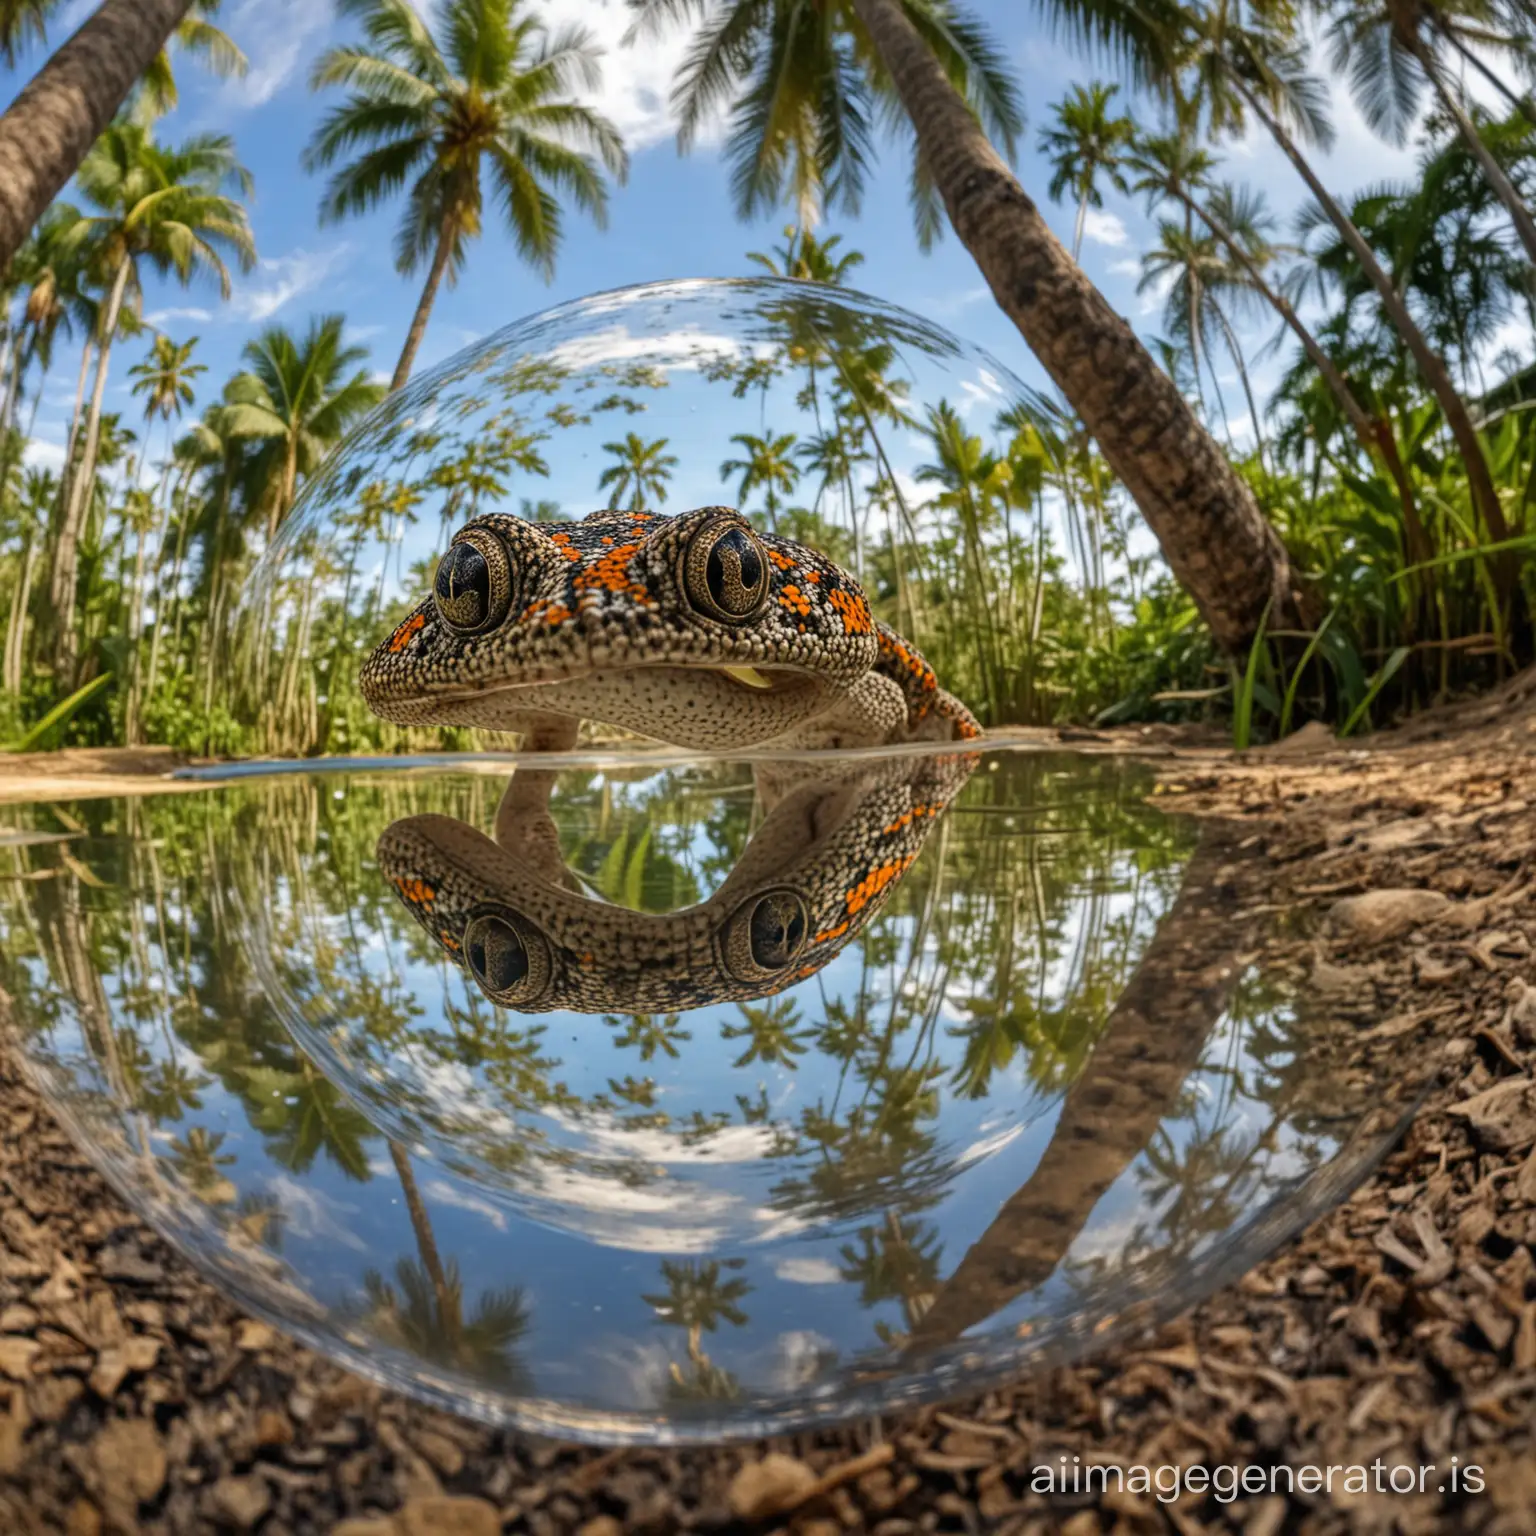 Thai-Gecko-and-Butterfly-in-Palm-Garden-with-Reflective-Fisheye-Lens-Effect